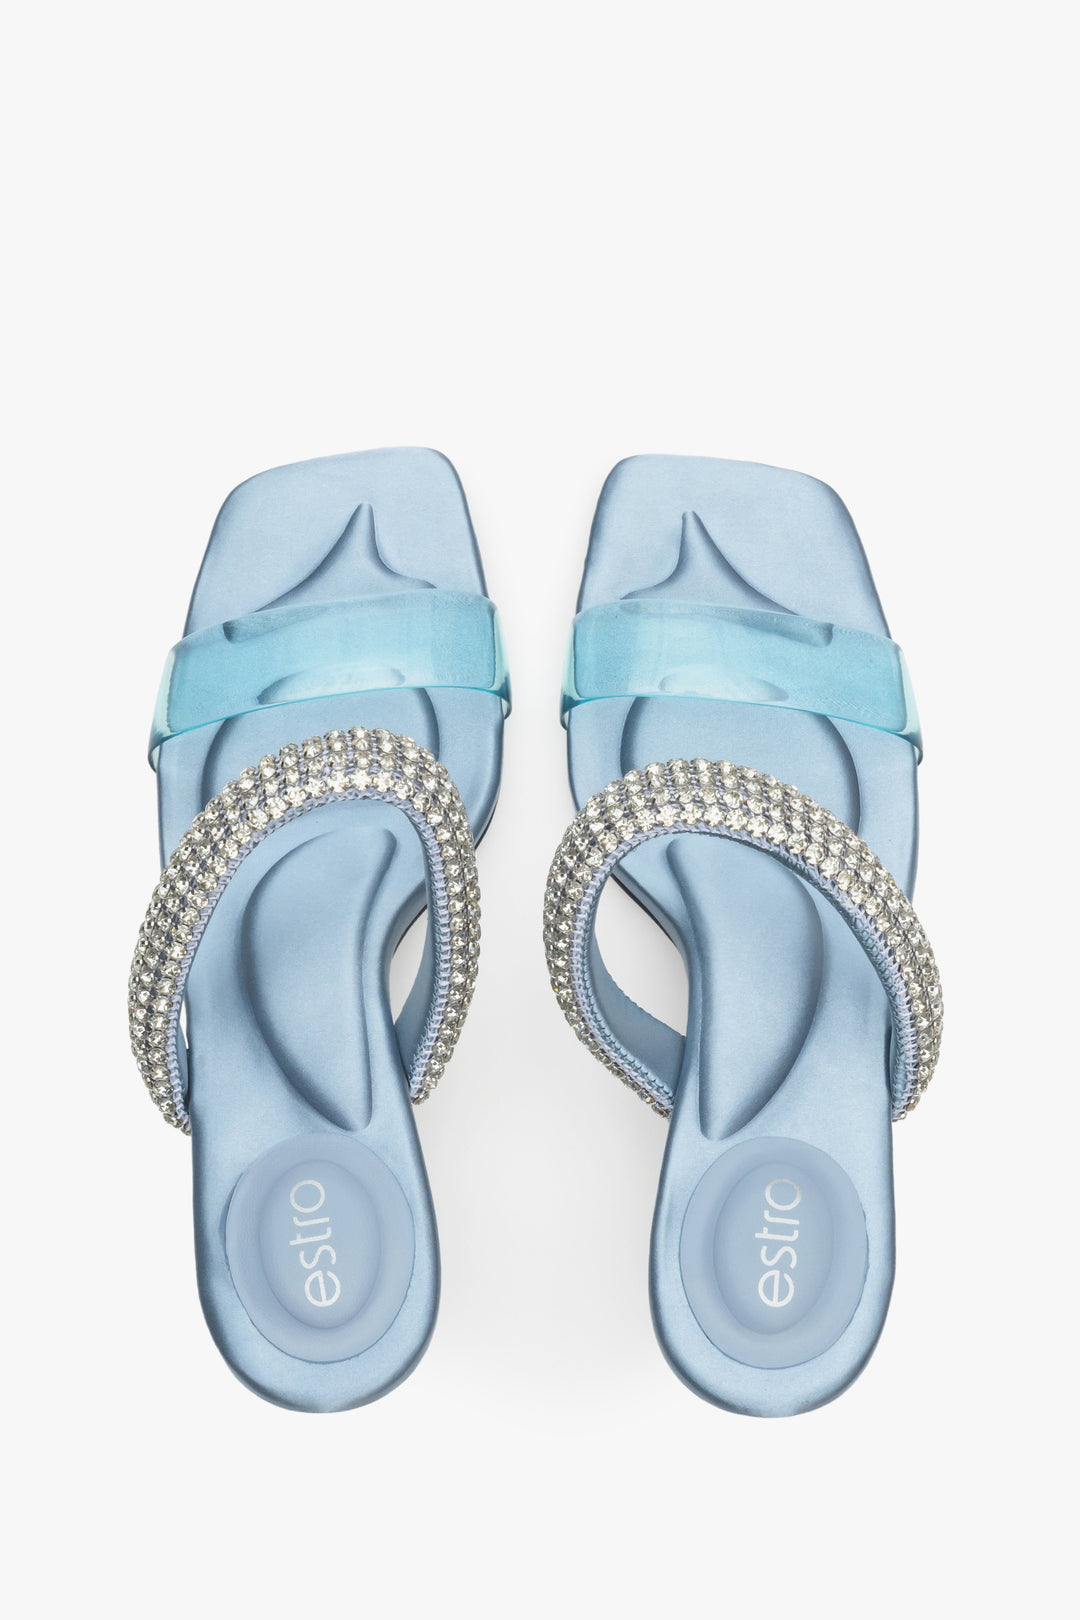 Women's elegant heeled blue mules with ornament.